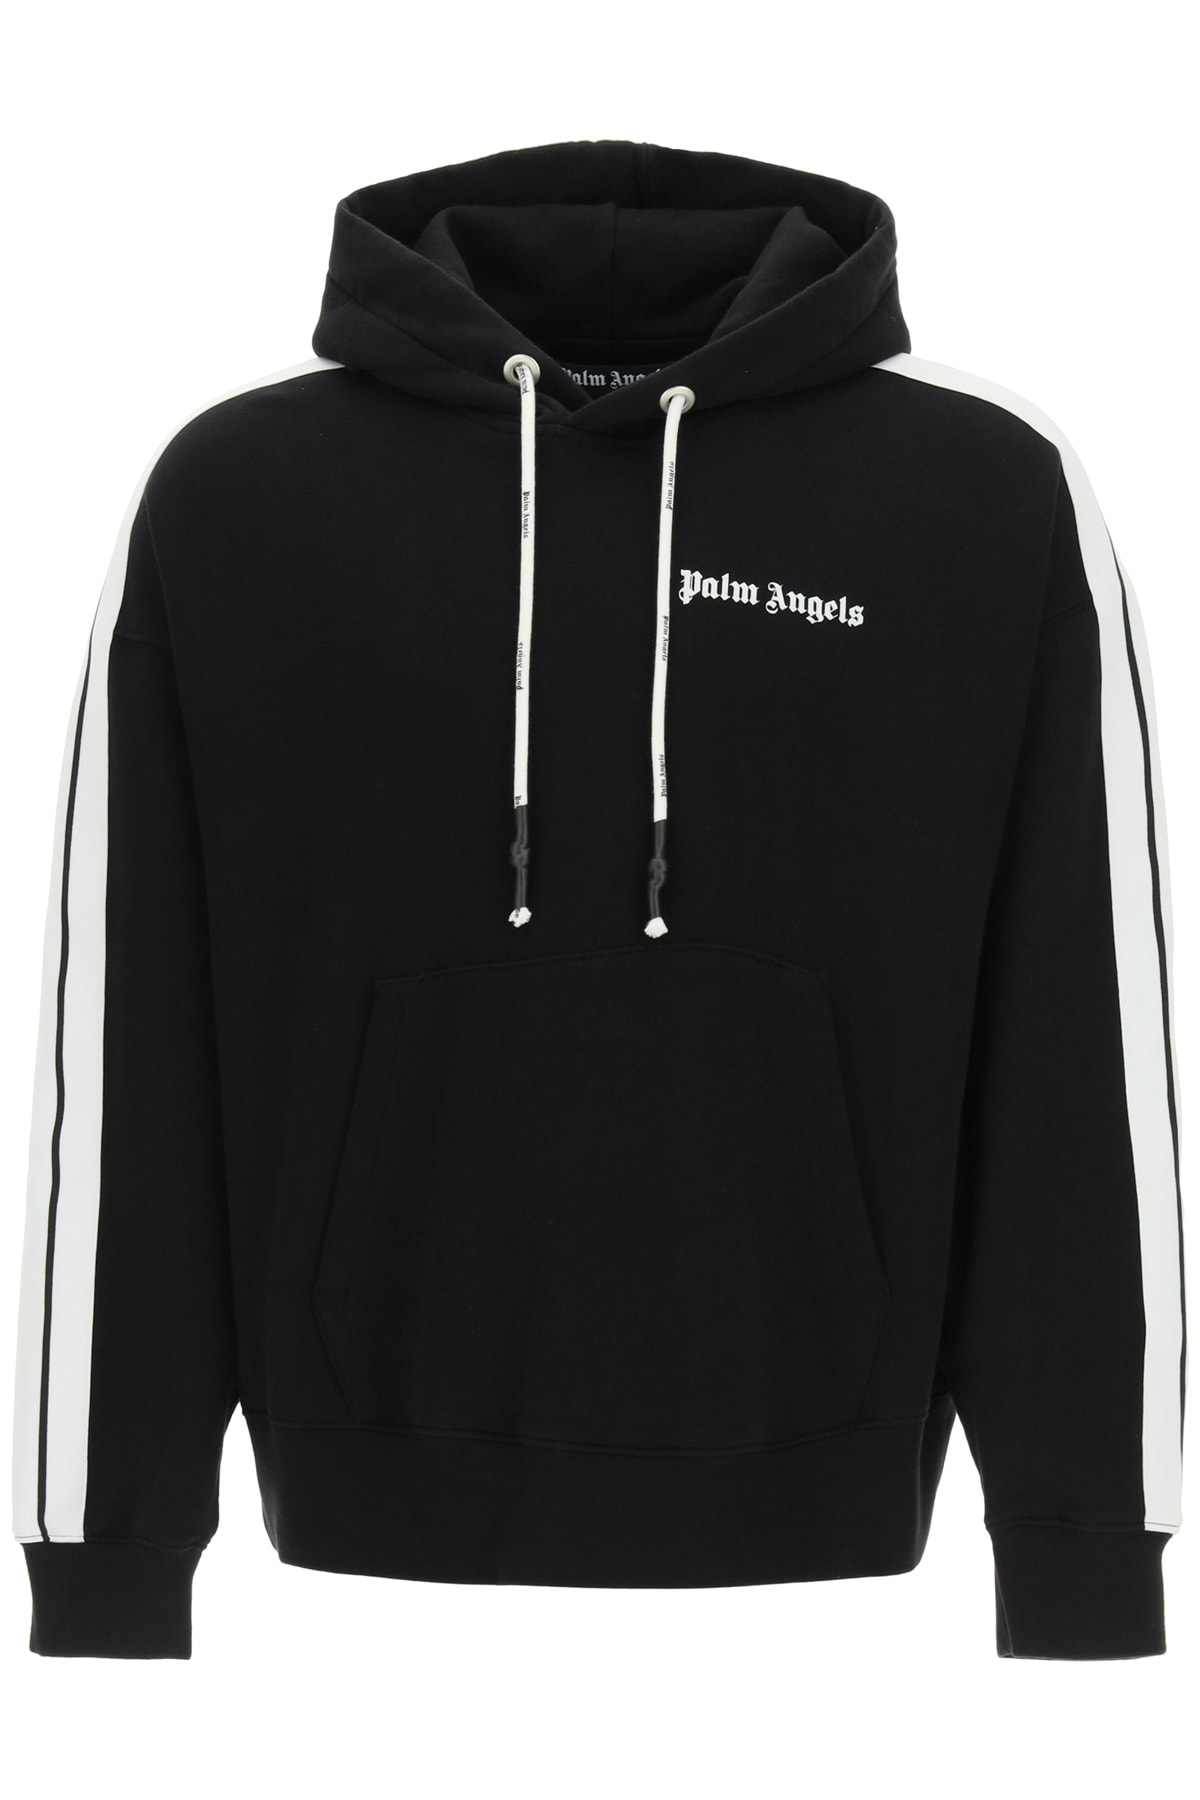 Palm Angels Hooded Sweatshirt With Logo And Bands